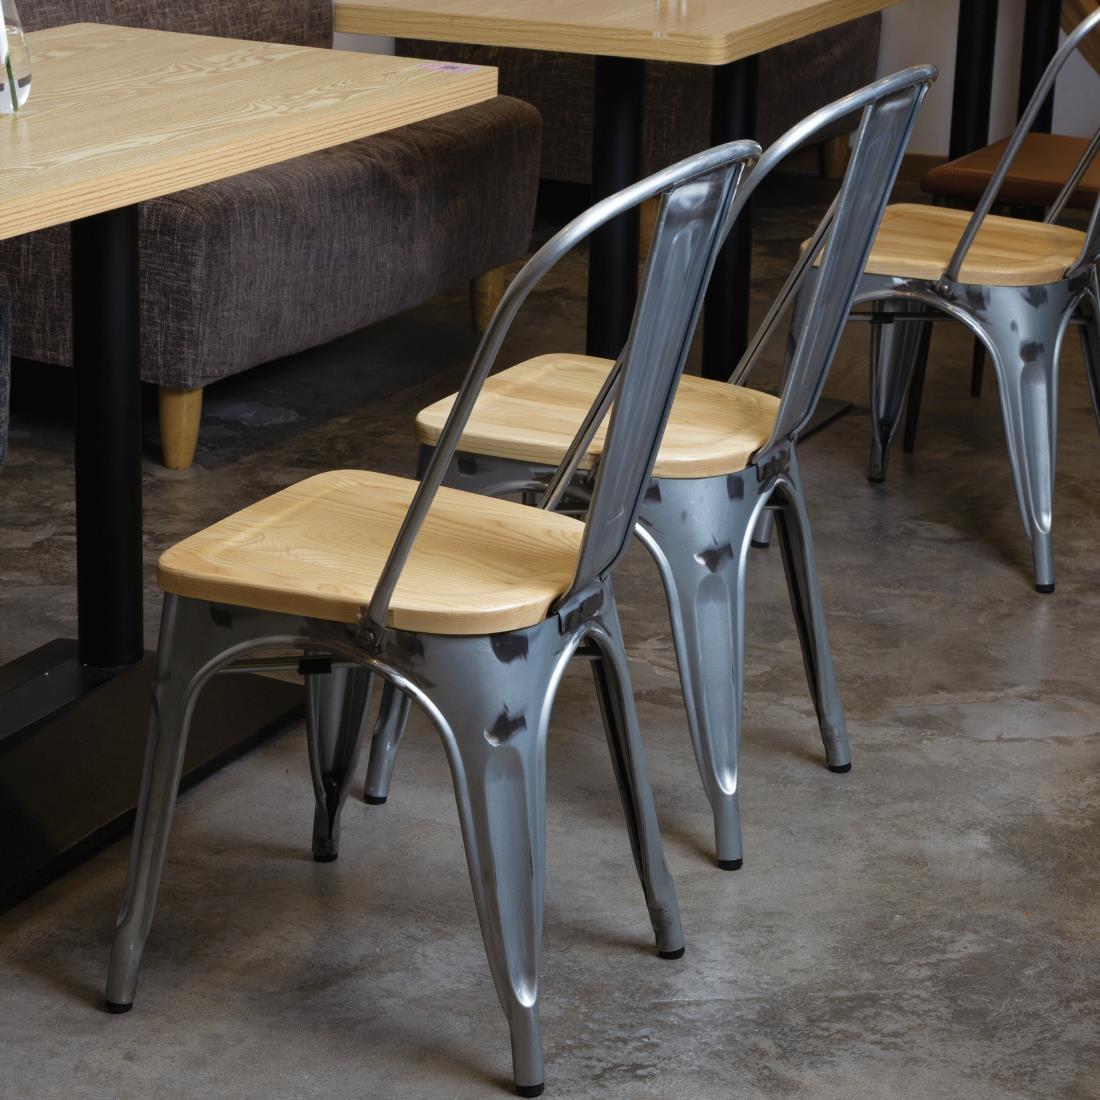 Bolero Bistro Side Chairs with Wooden Seat Pad Galvanised Steel (Pack of 4) - GM642  - 7